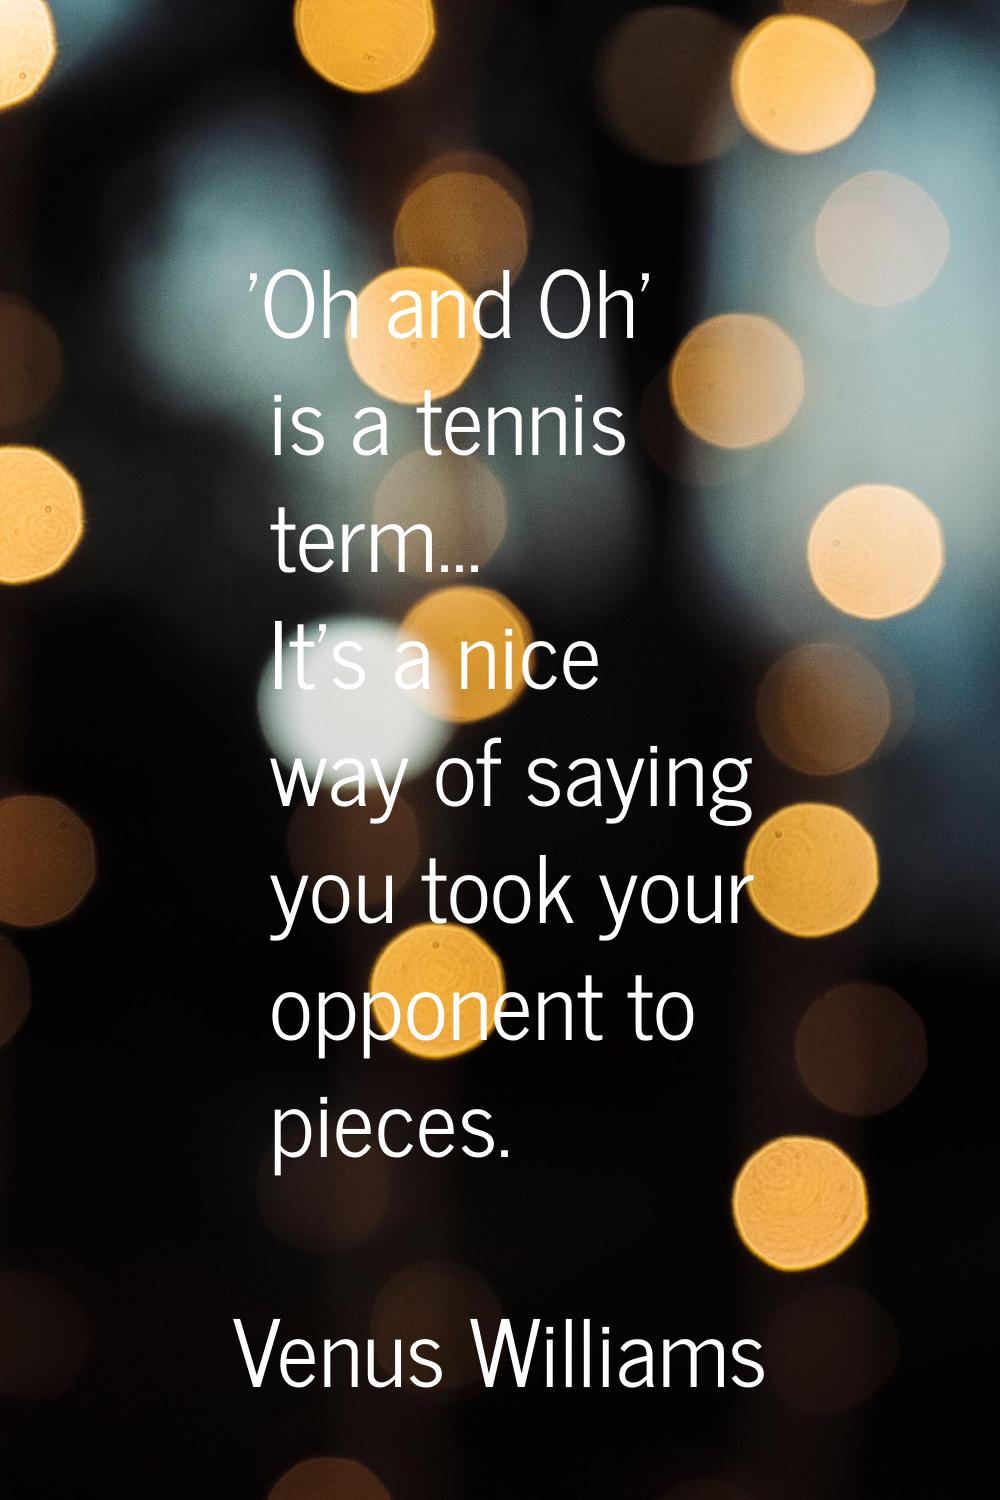 'Oh and Oh' is a tennis term... It's a nice way of saying you took your opponent to pieces.